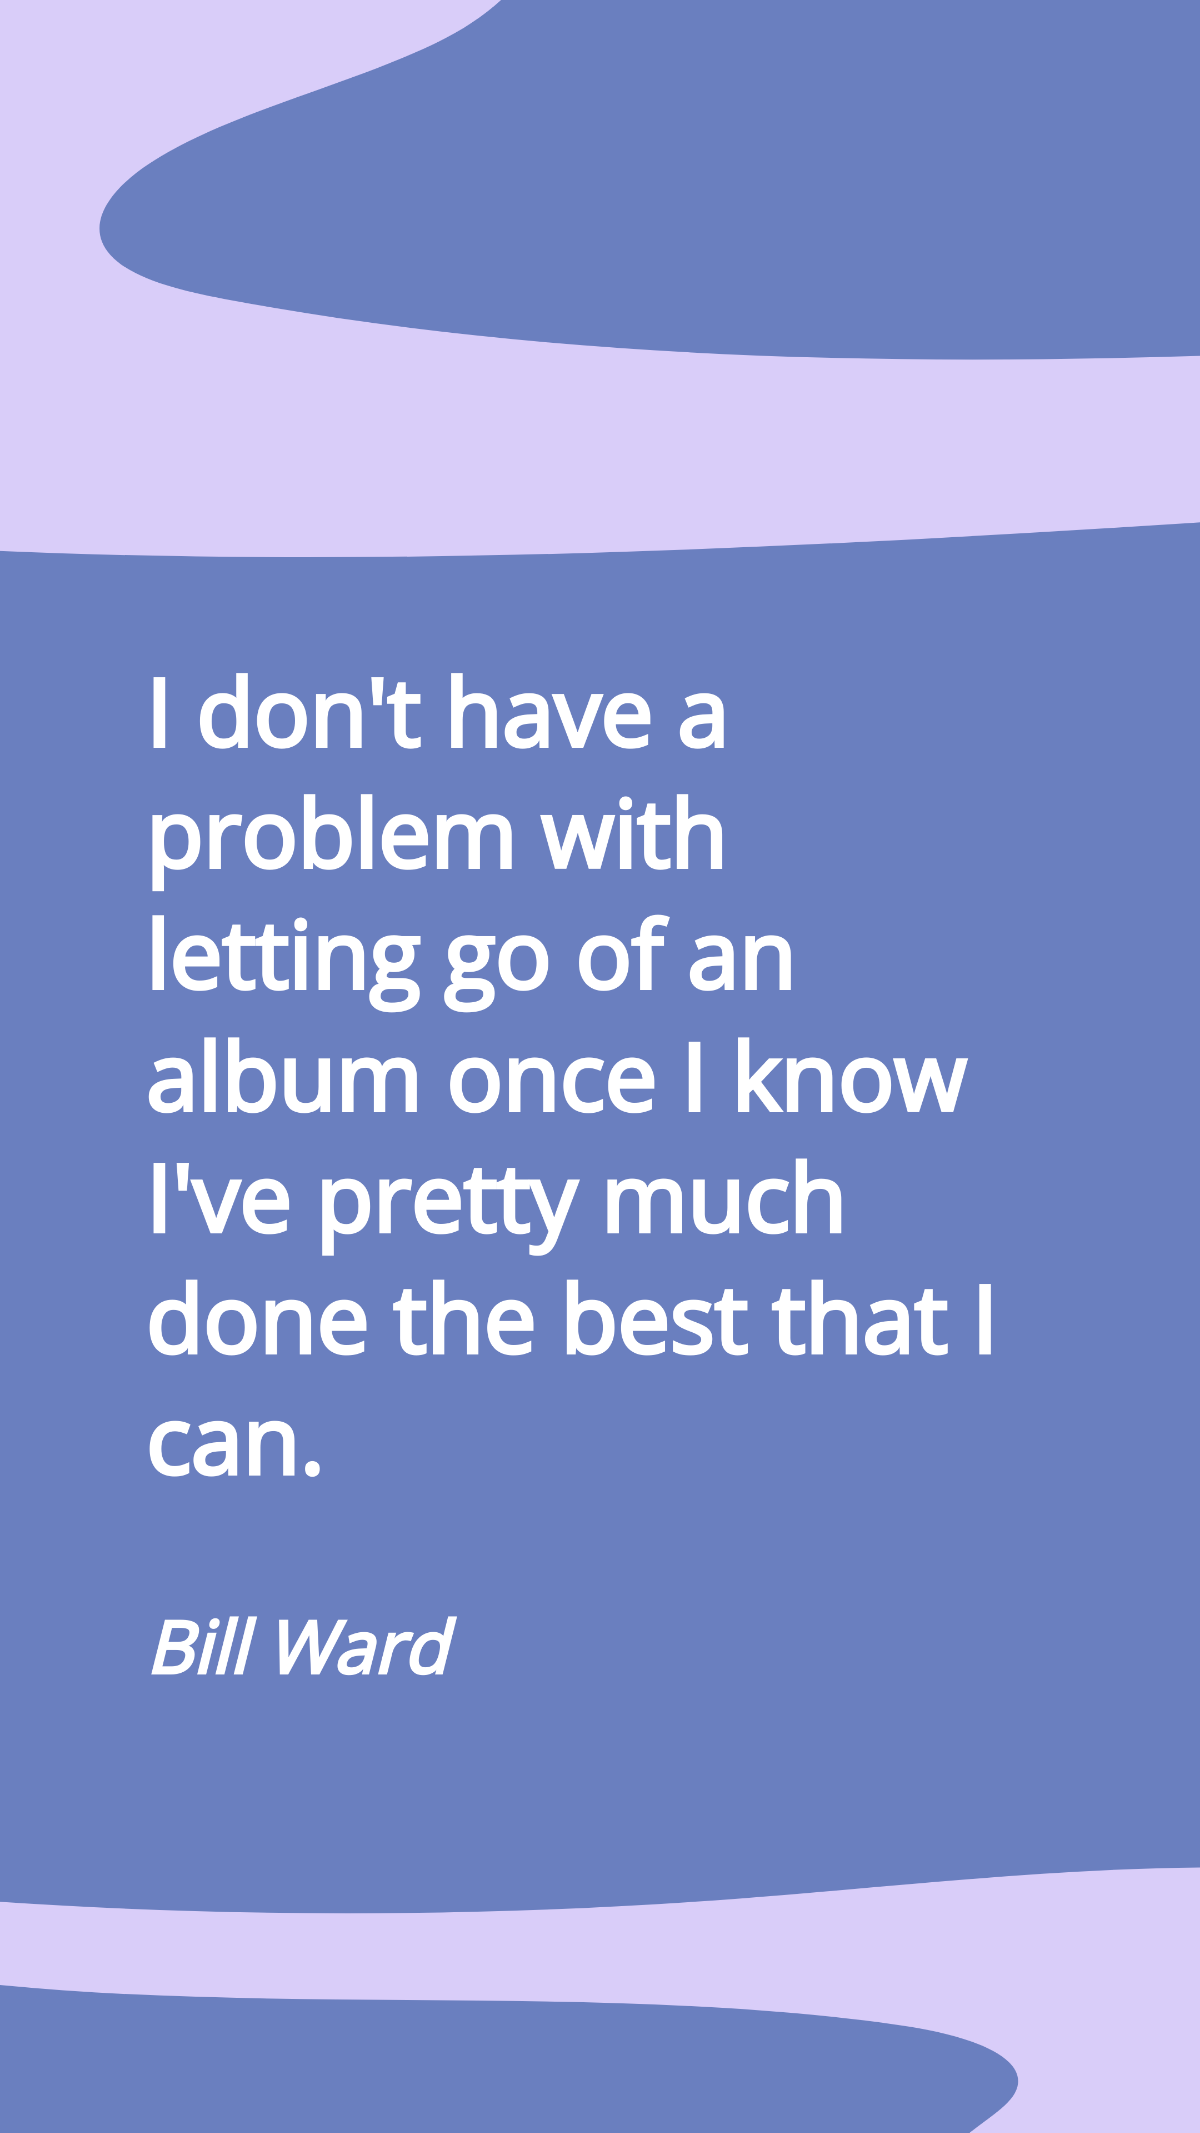 Bill Ward - I don't have a problem with letting go of an album once I know I've pretty much done the best that I can.